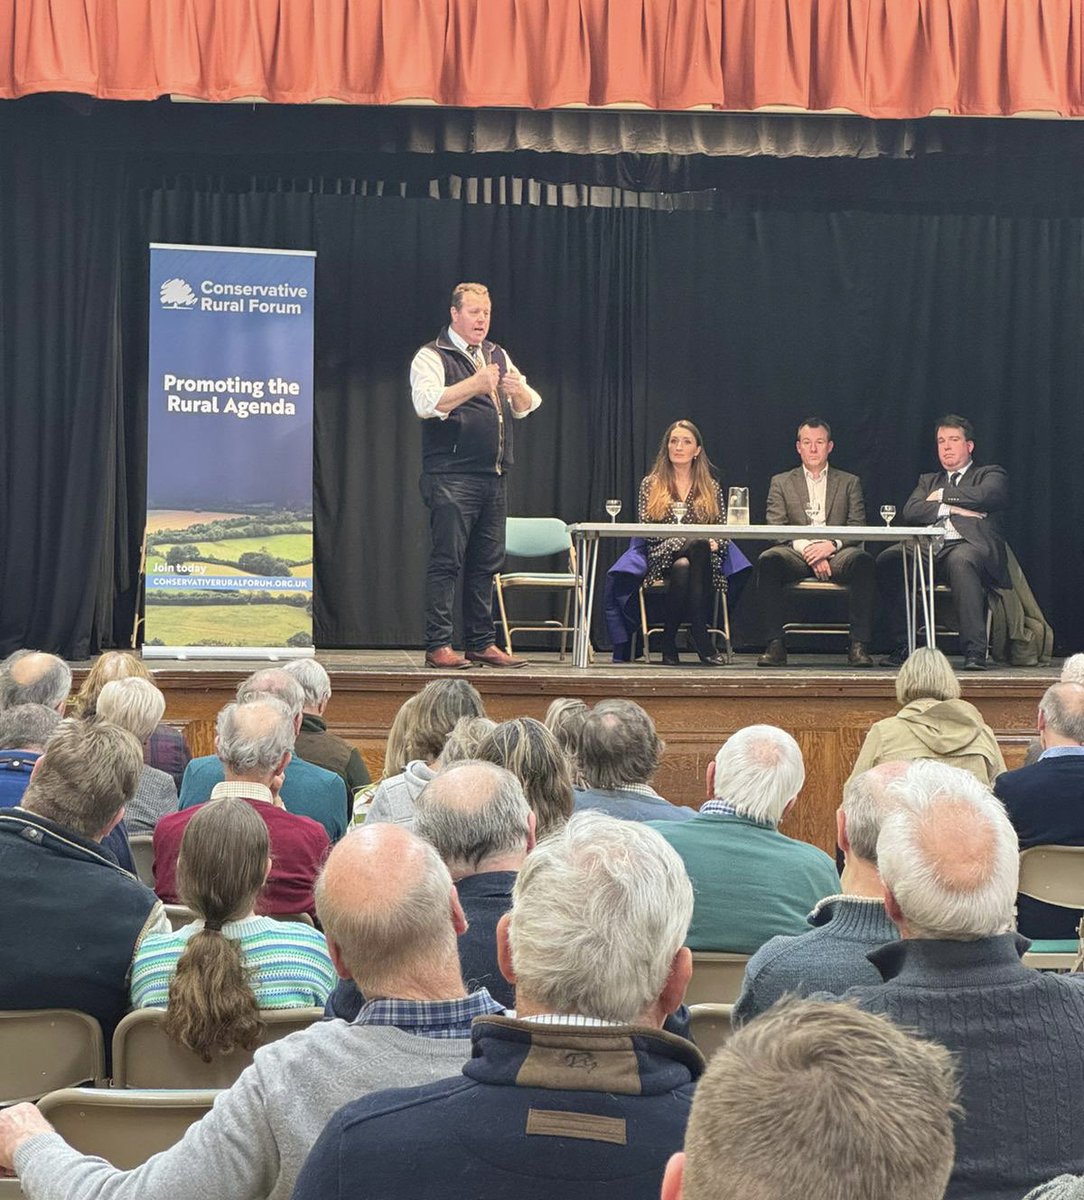 Record turnout last night for Farming Minister @Mark_Spencer in Shropshire 🚜 Mark set out the work the Government is doing to support rural communities alongside @_AndersonStuart @craig4monty and @LizzieHacking 🐑